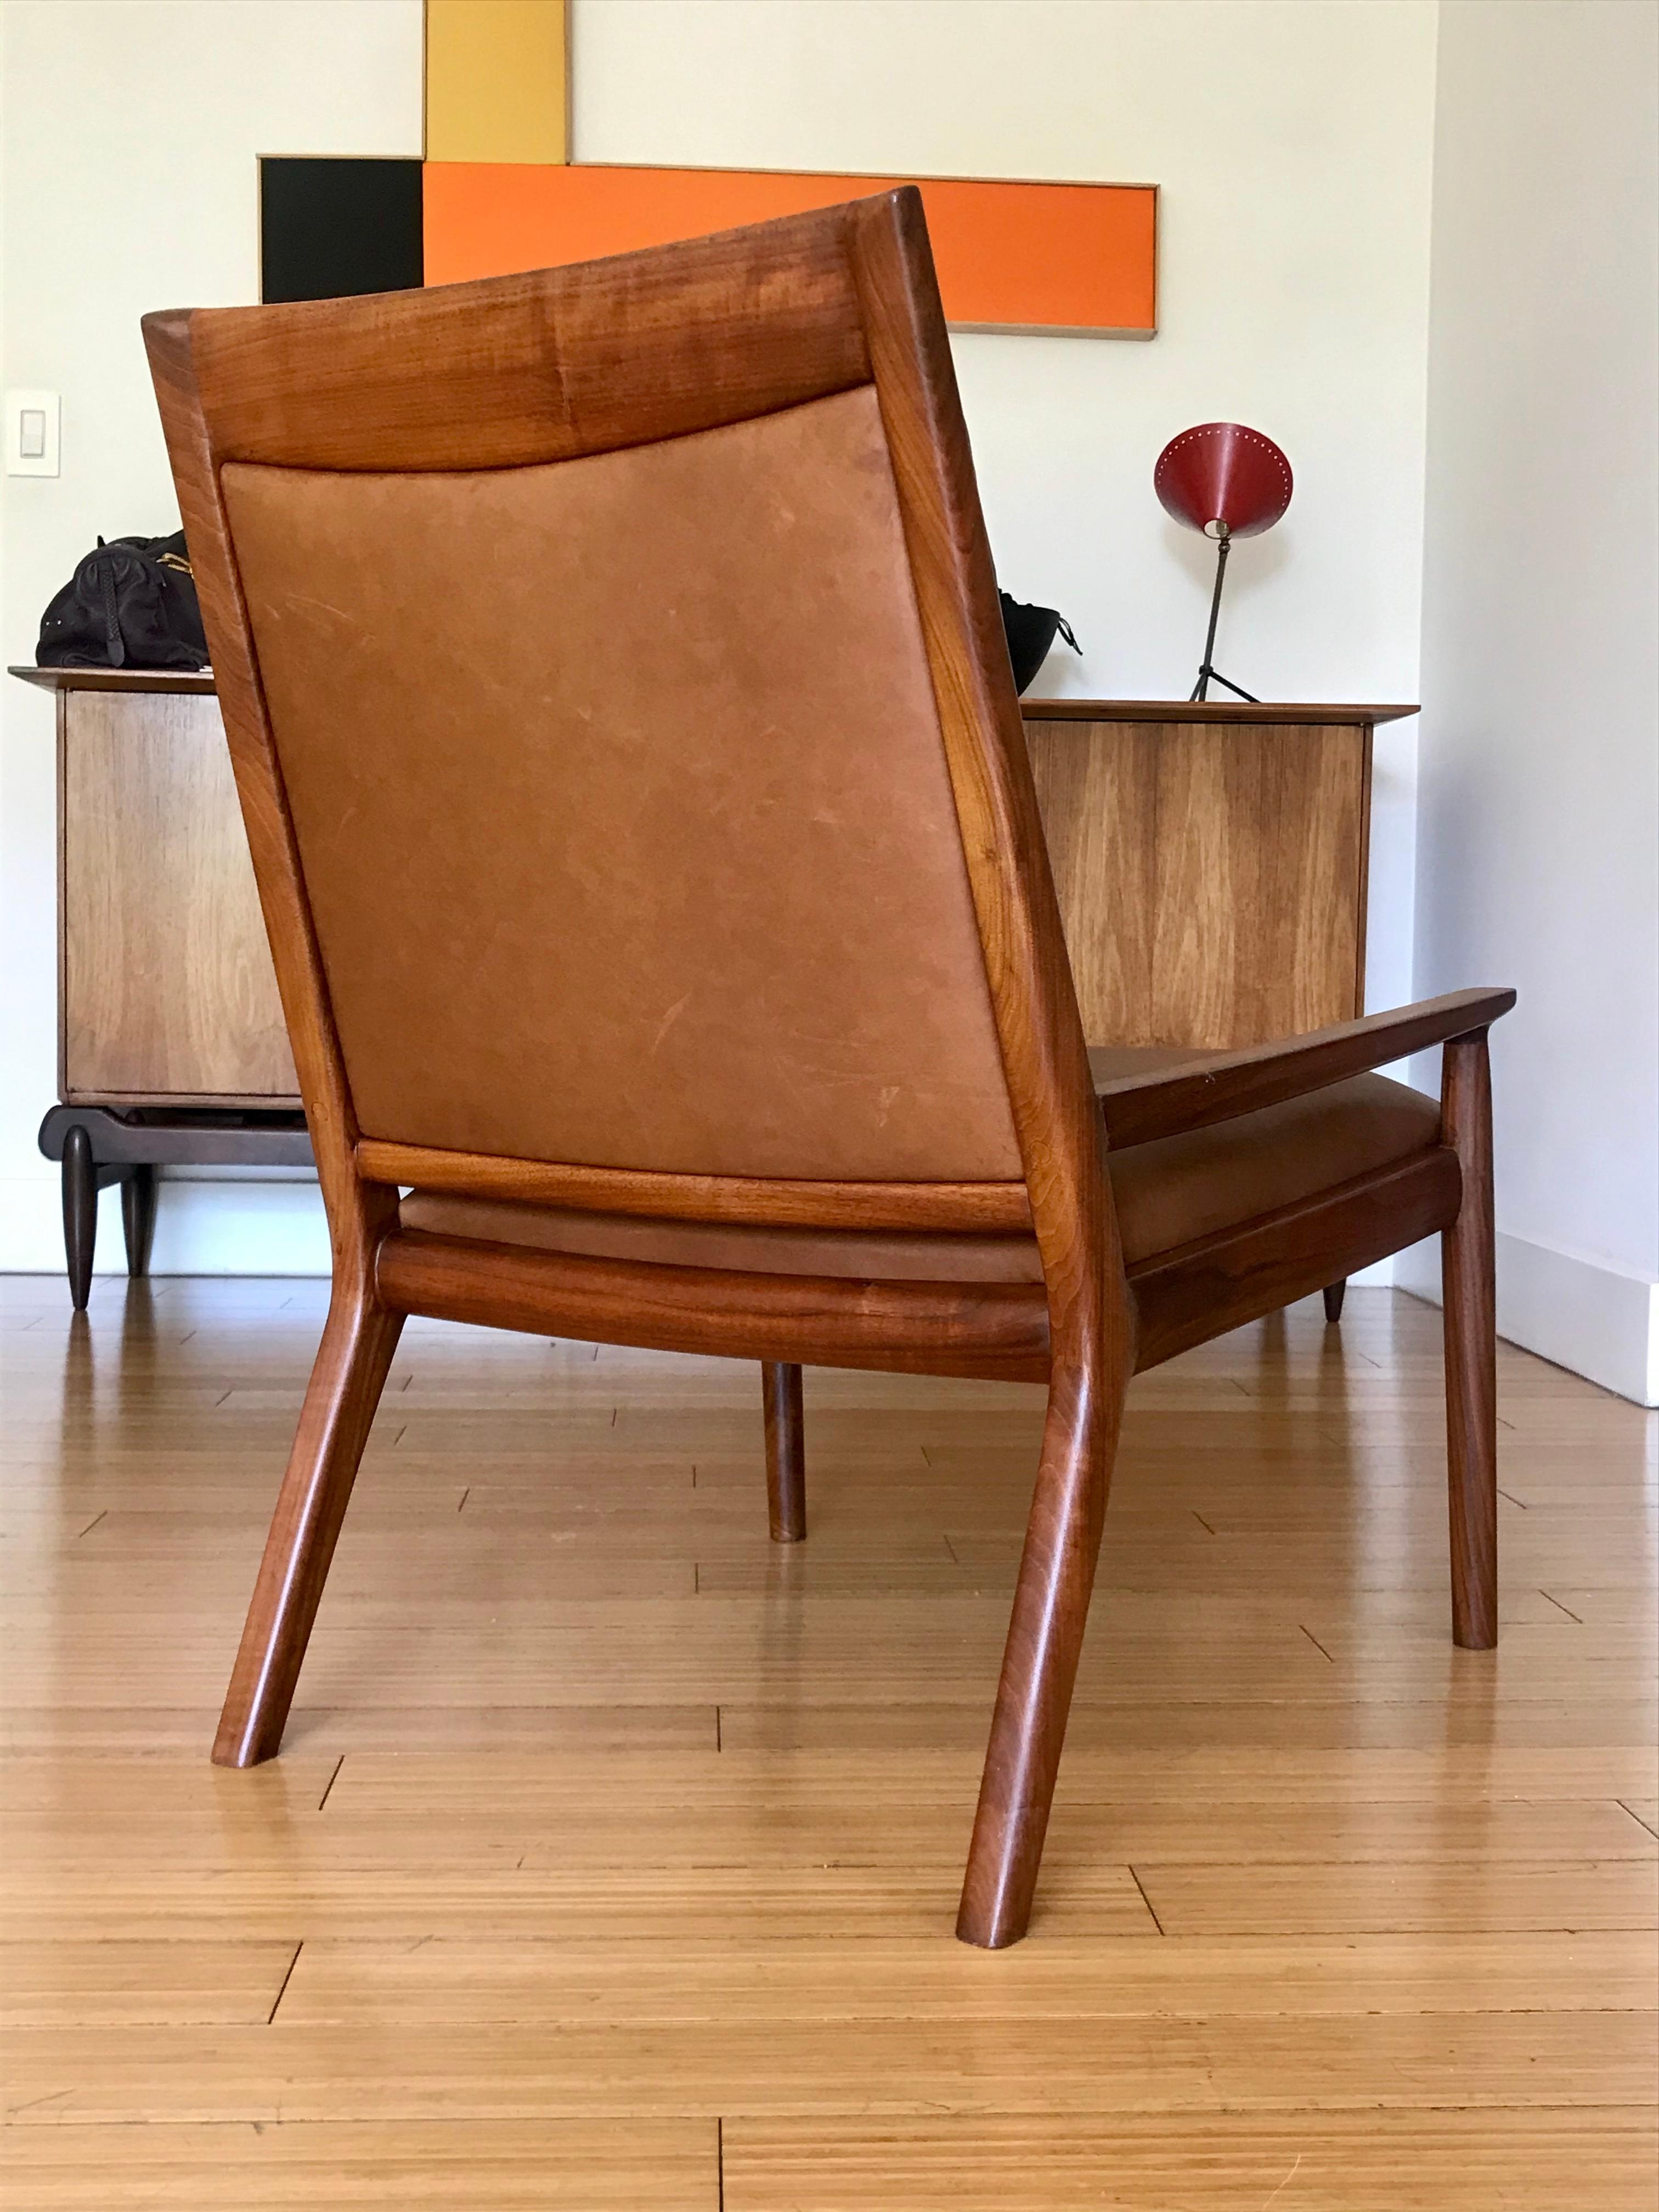 American Modern Studio Craft Leather Lounge Chair After Maloof  